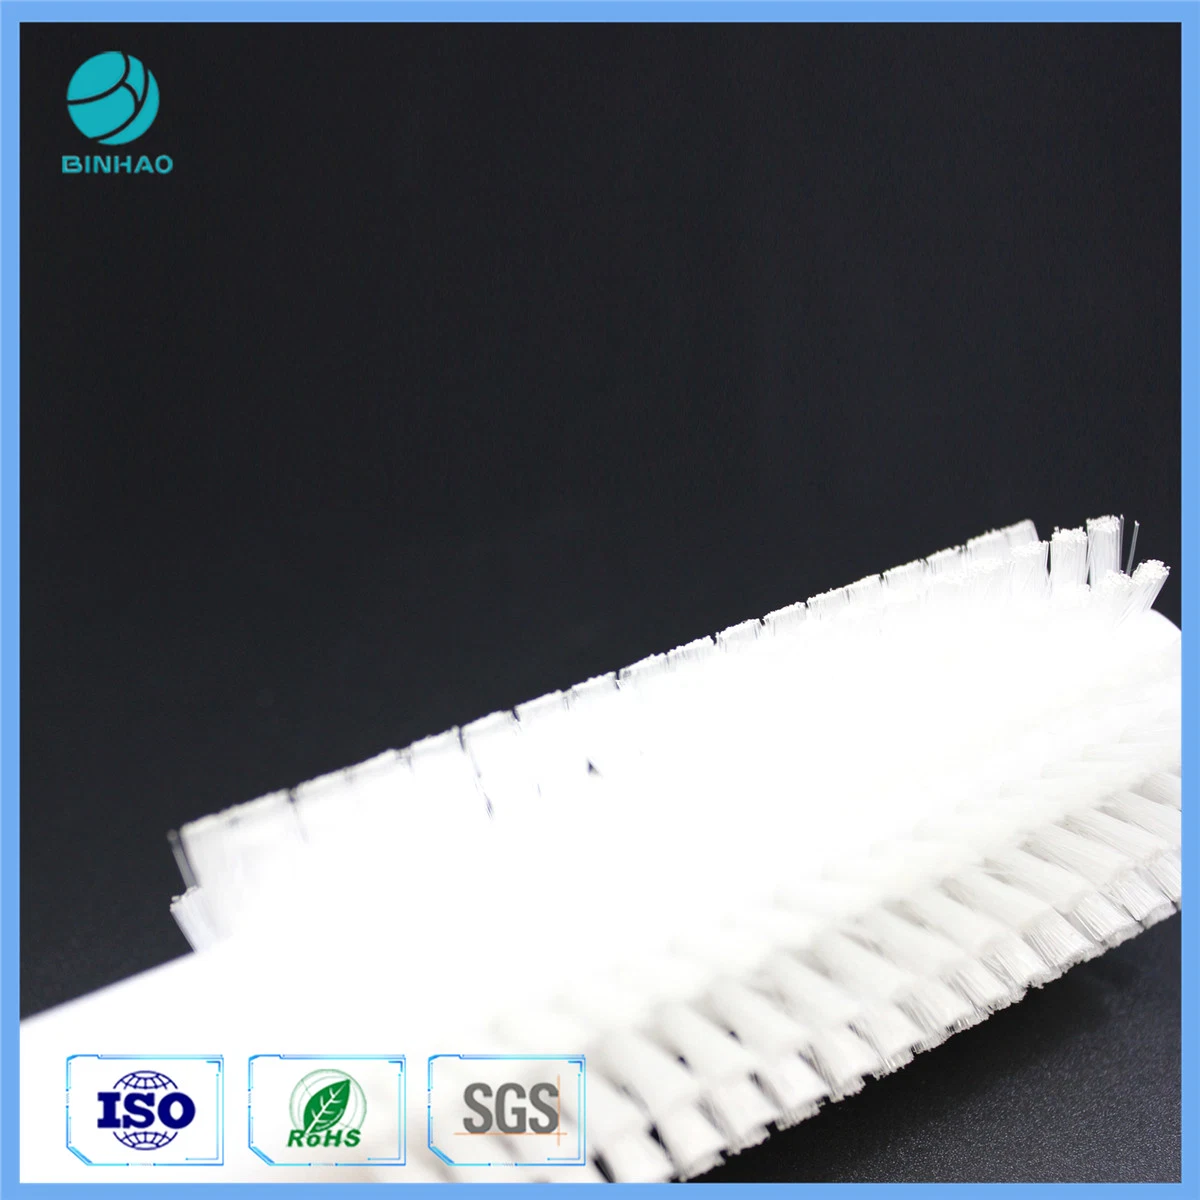 Customized Size Nylon Bristle Cleaning Long Brush for Industrial Cleaning Mk9 Equipment